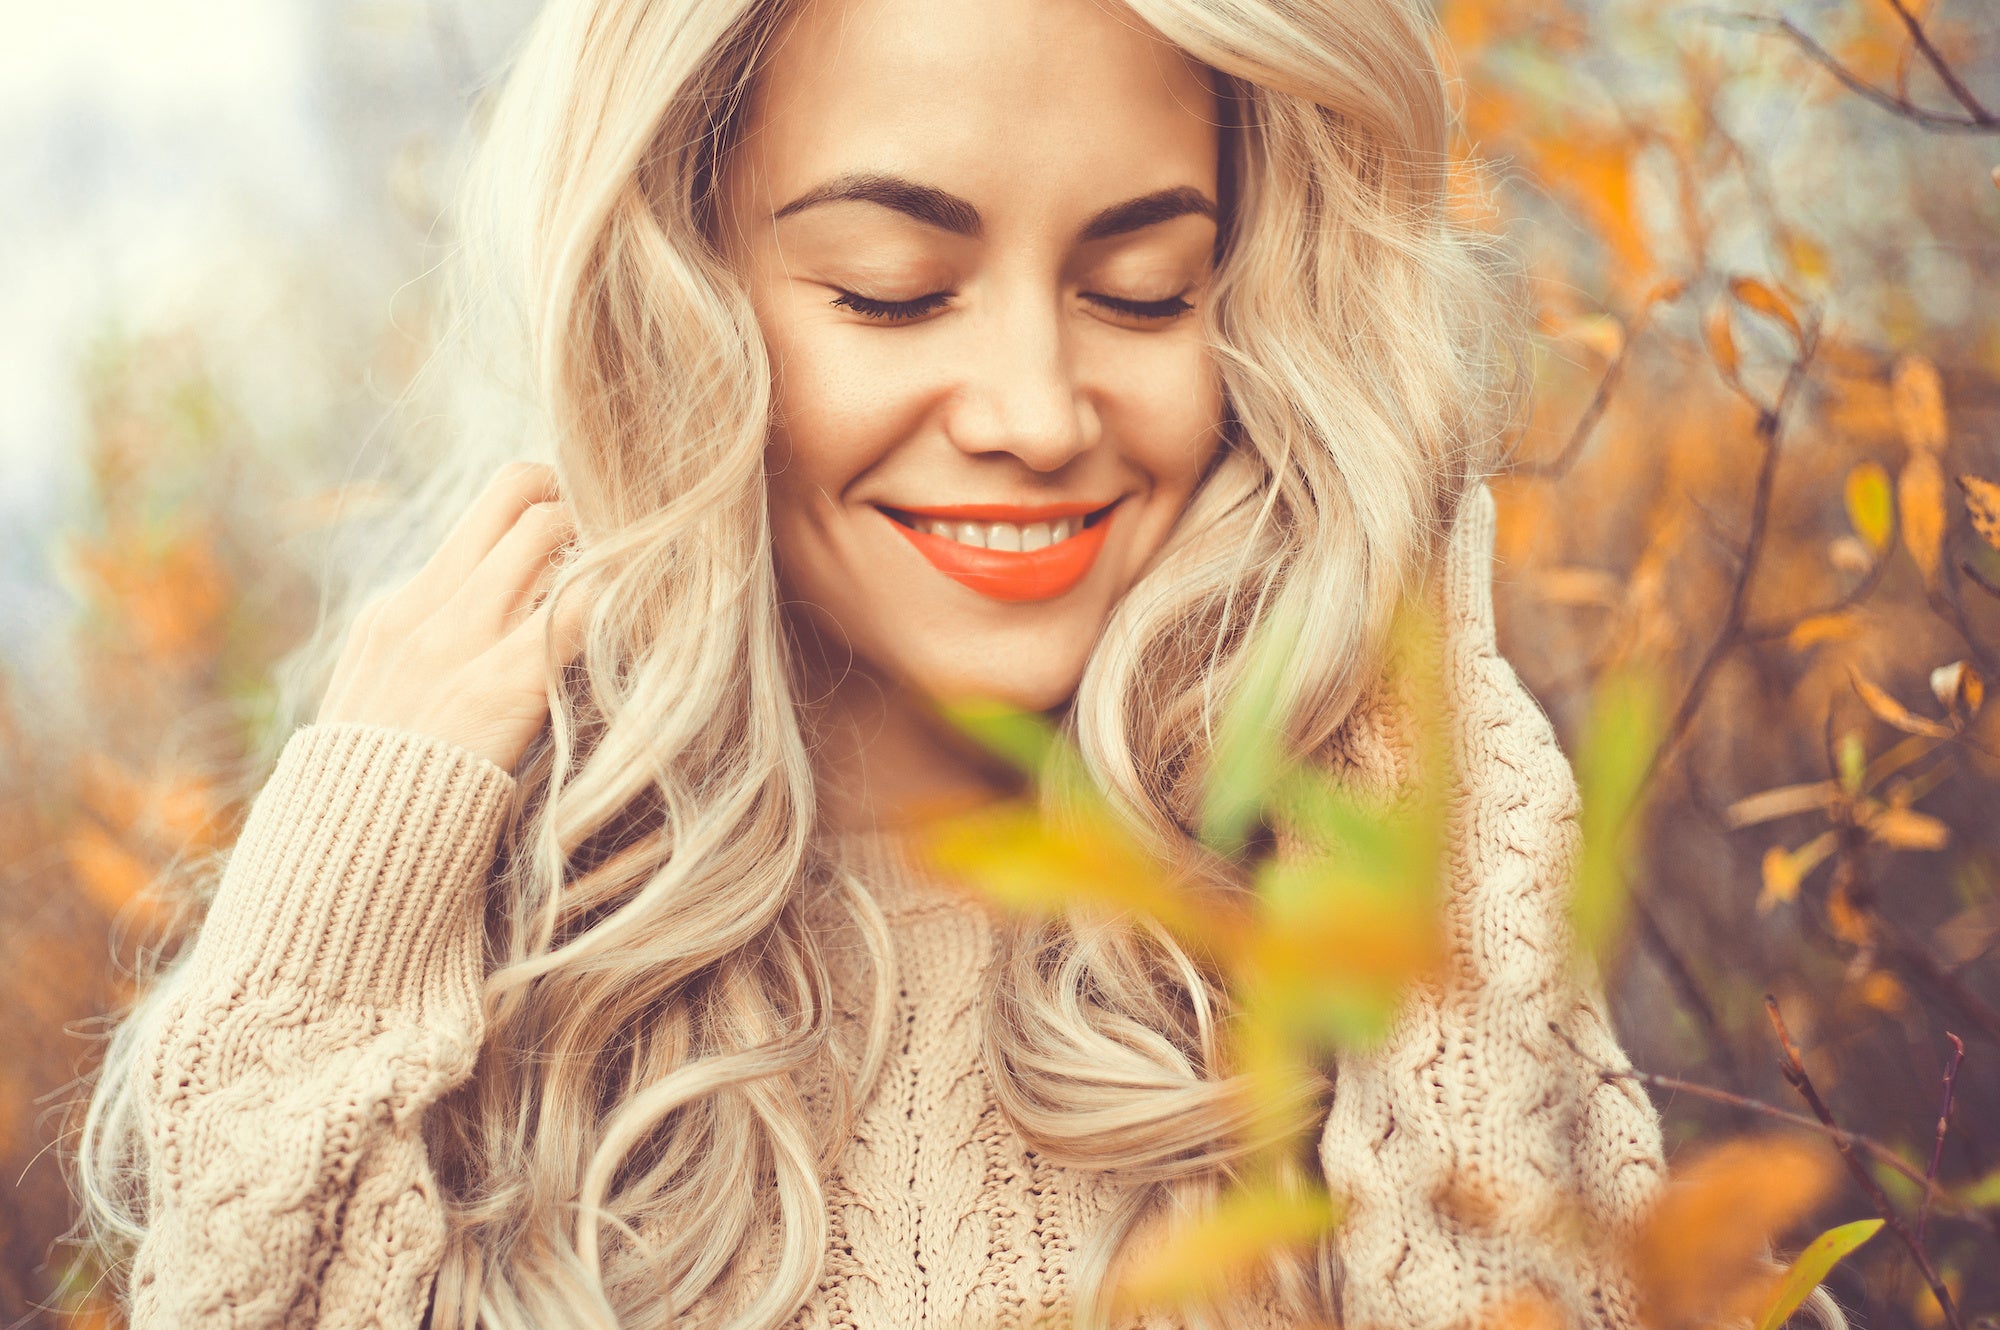 3 Ways to Care for Your Lips This Fall